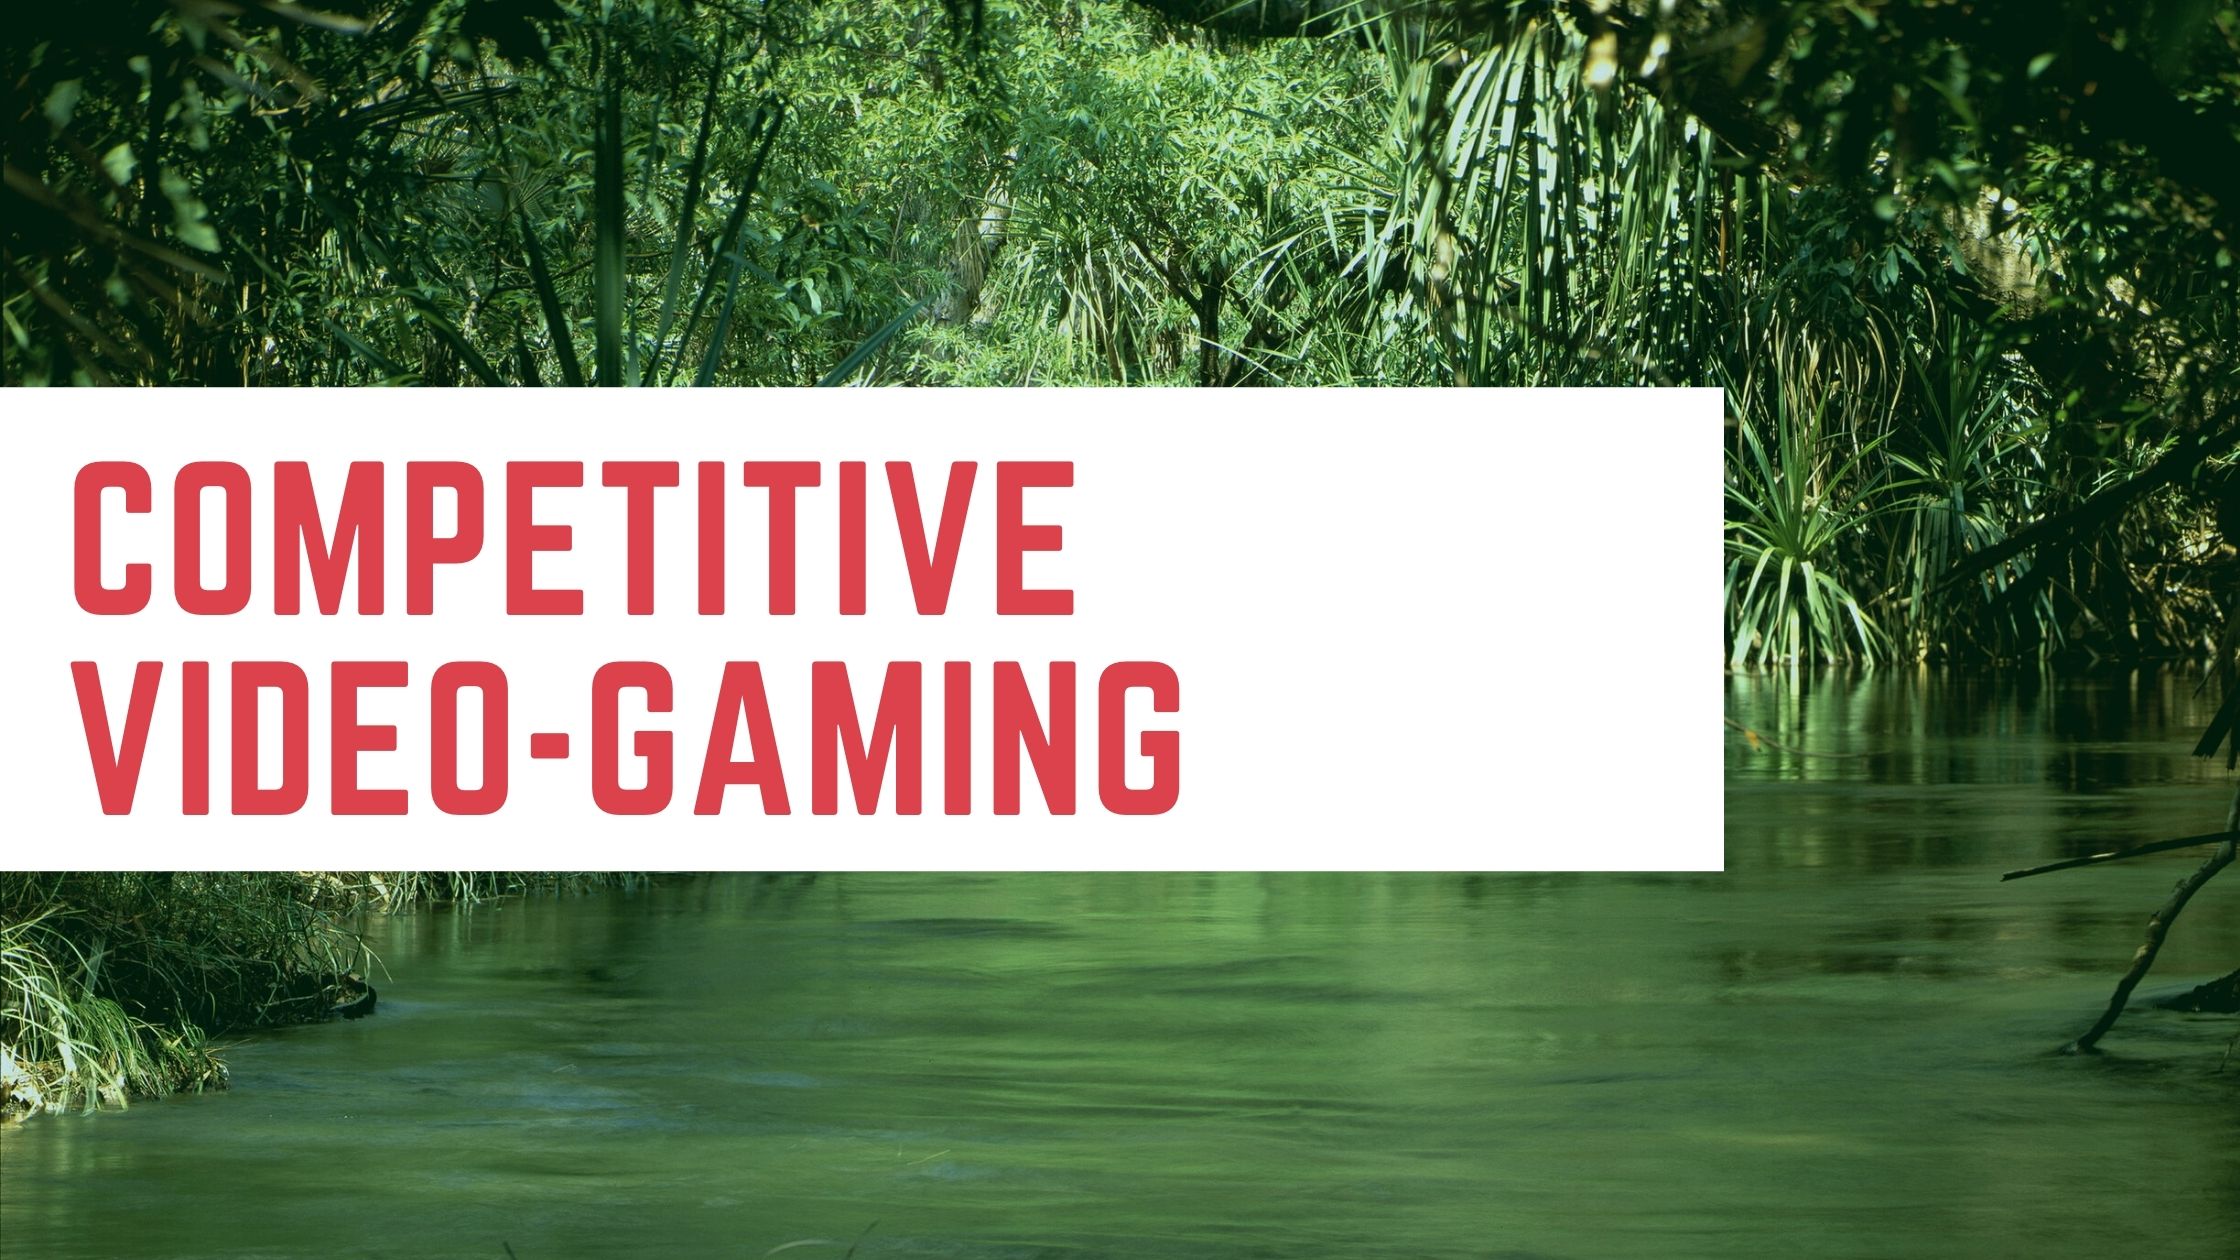 Competitive video-gaming